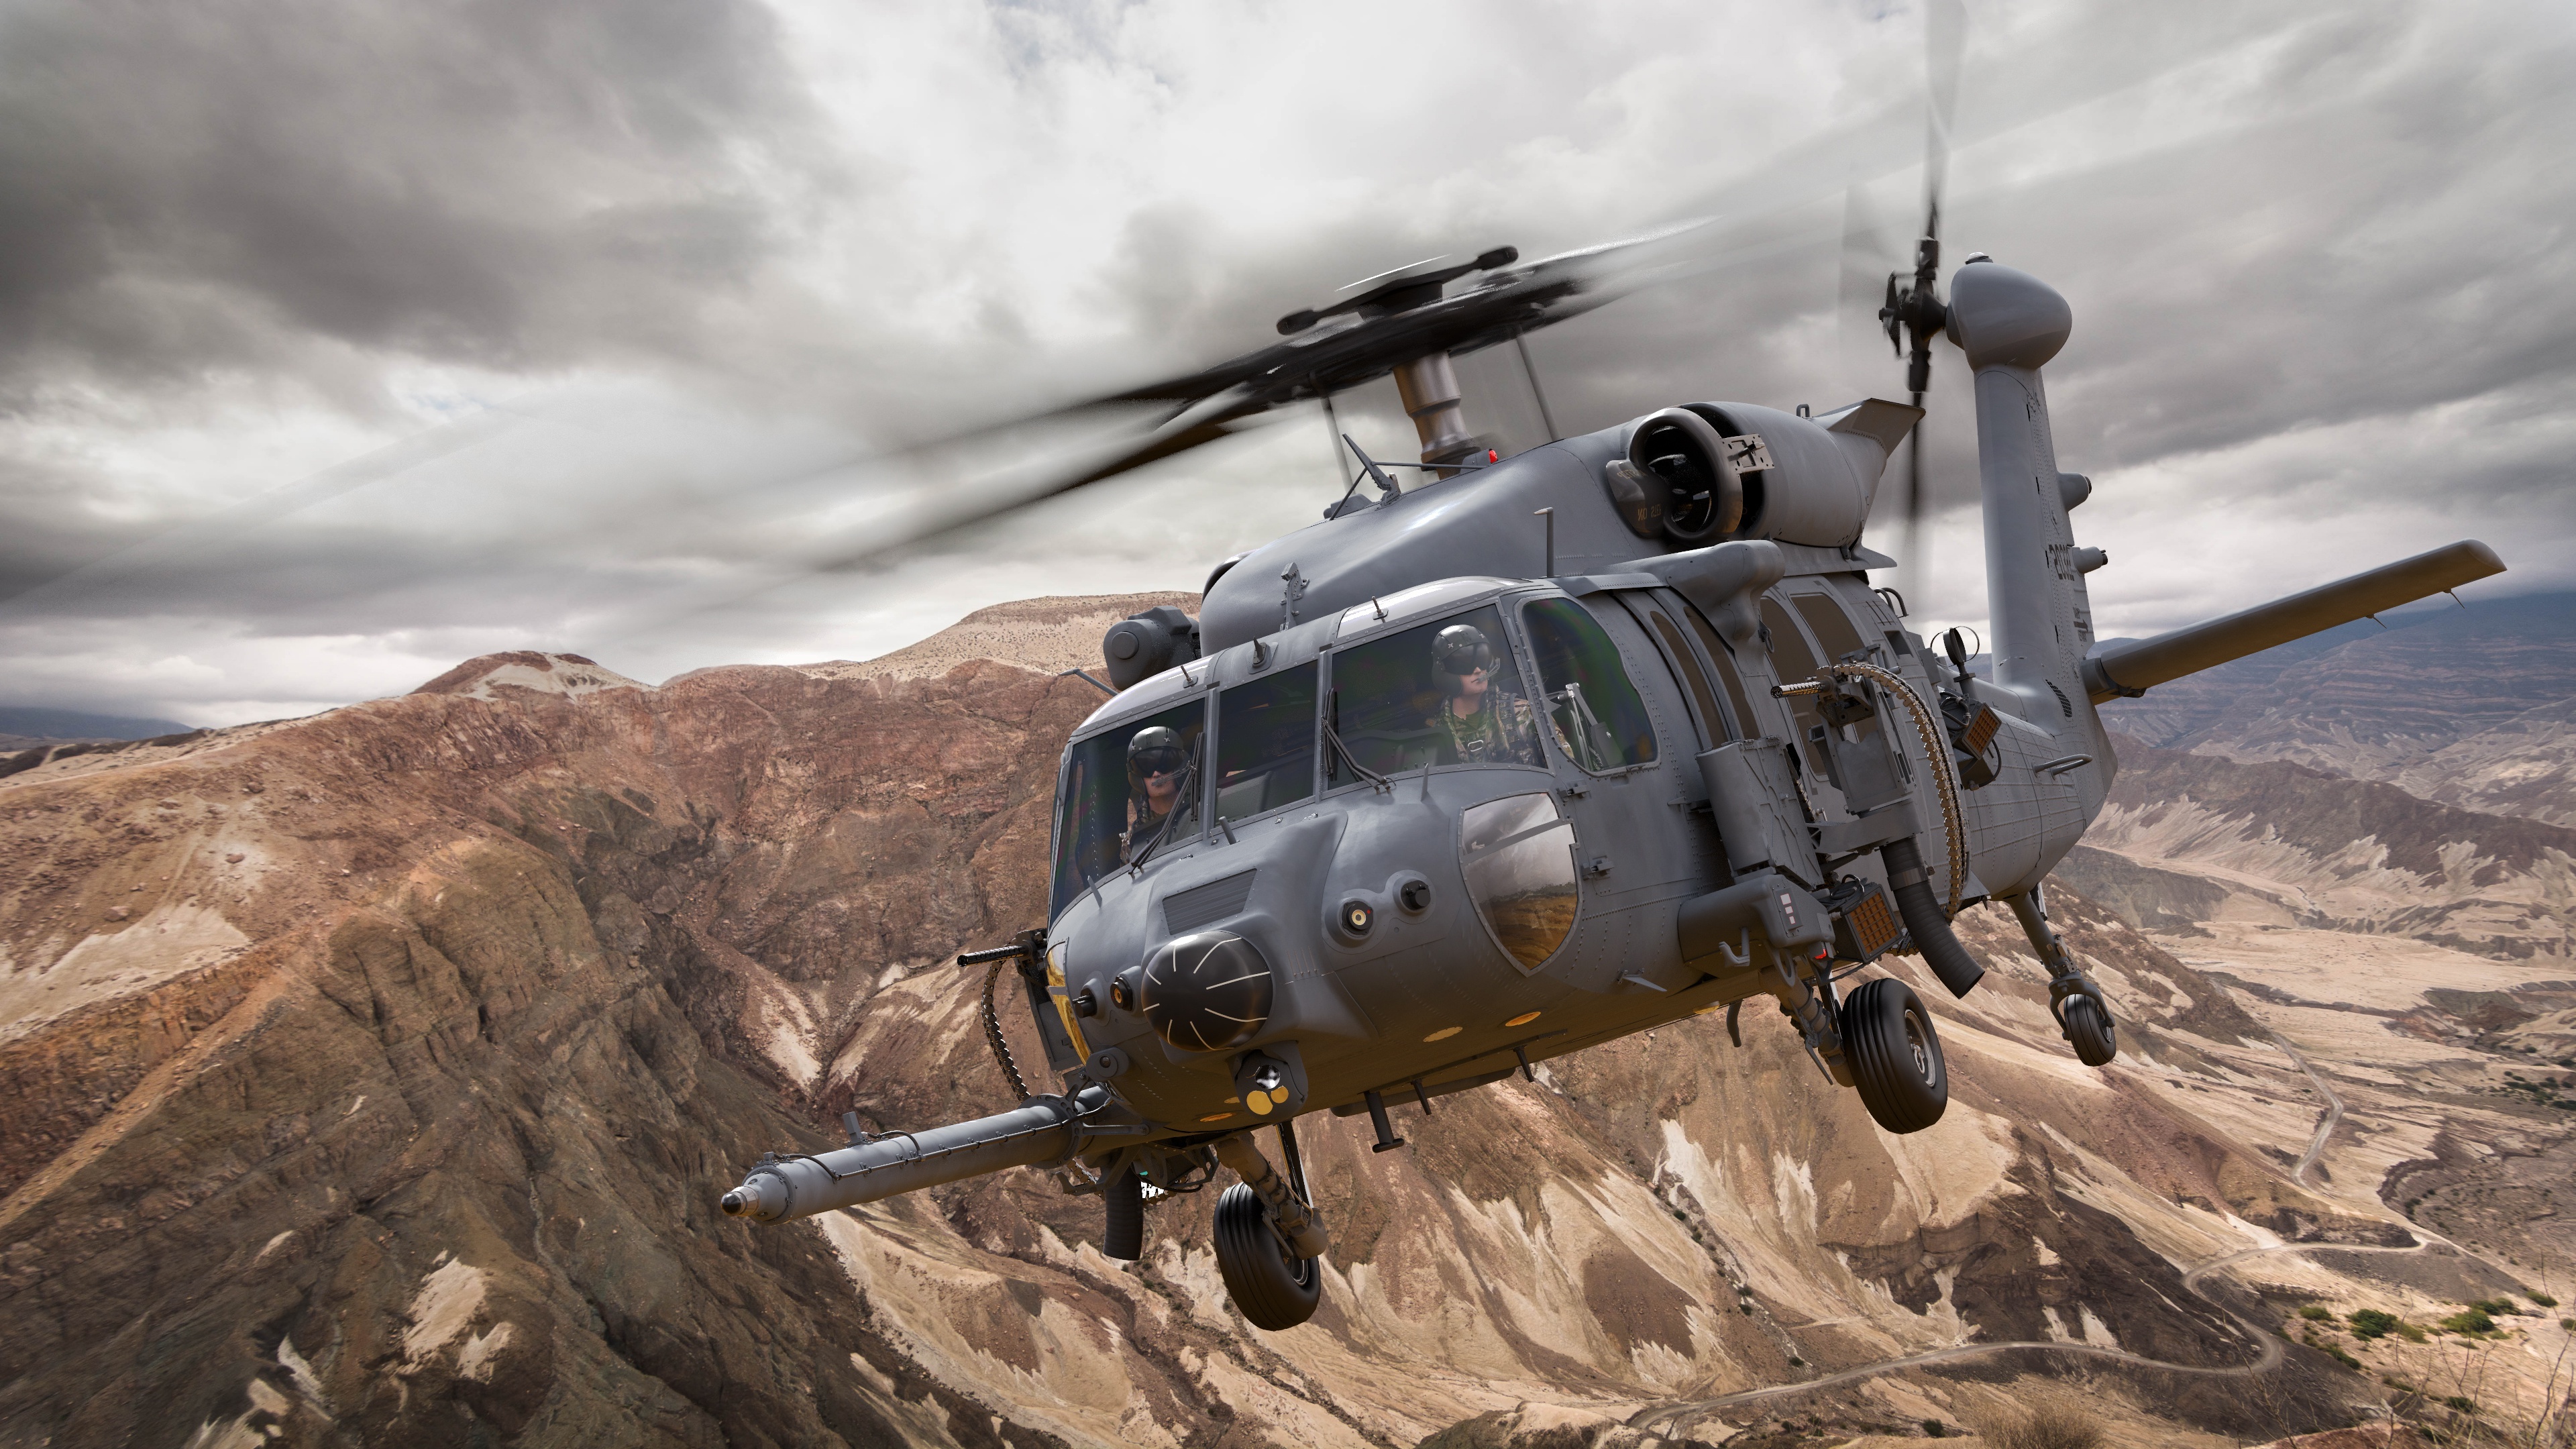 Sikorsky HH-60 Pave Hawk, Military helicopter, USAF, American military aircraft, 3840x2160 4K Desktop